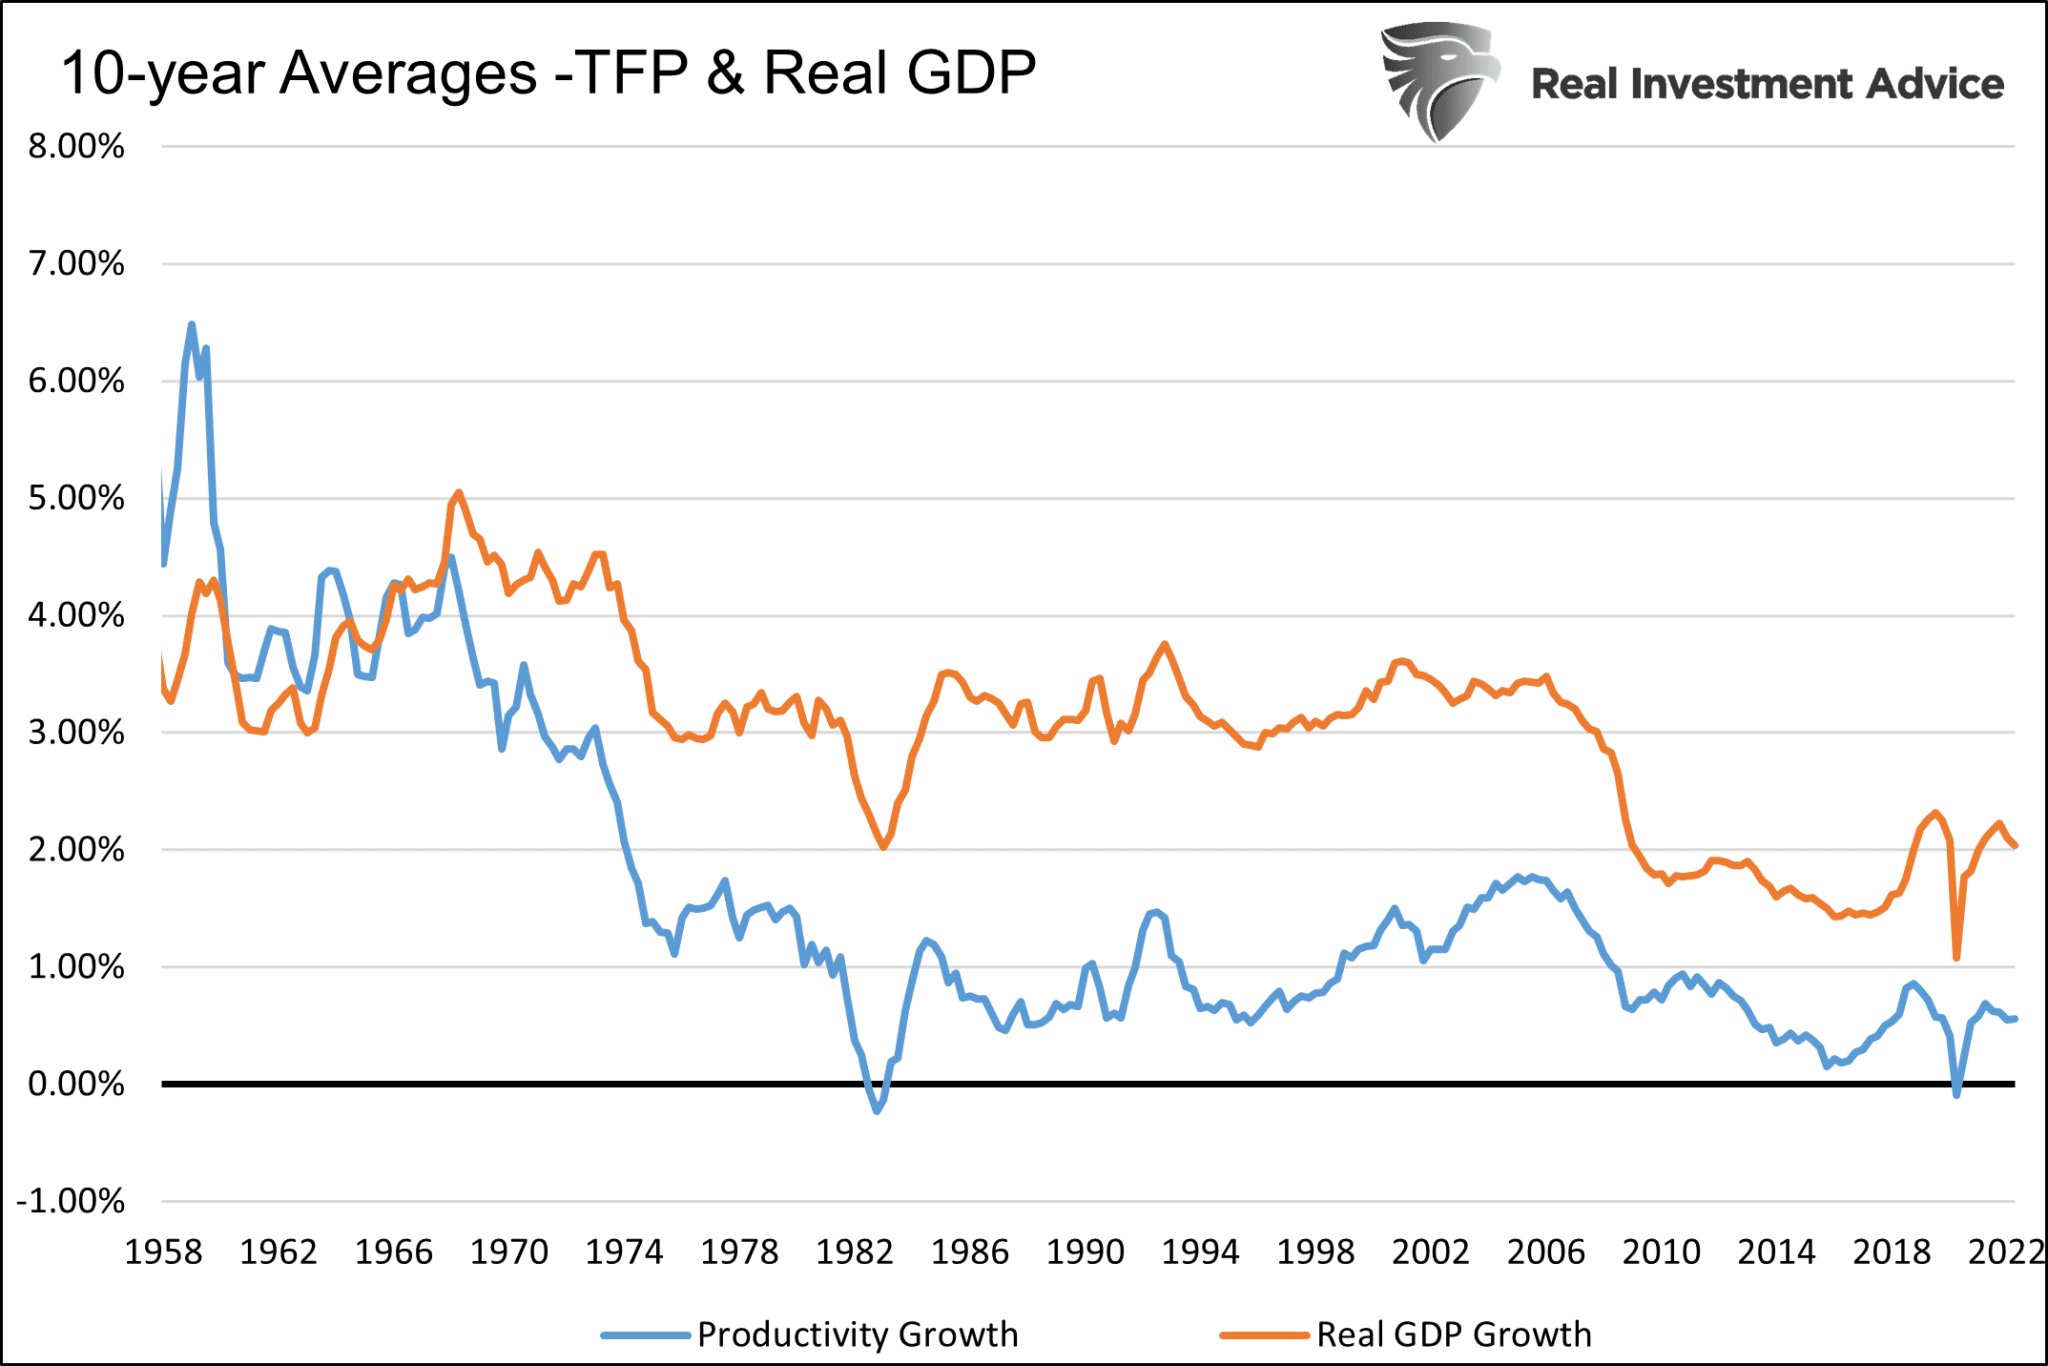 TFP and Real GDP